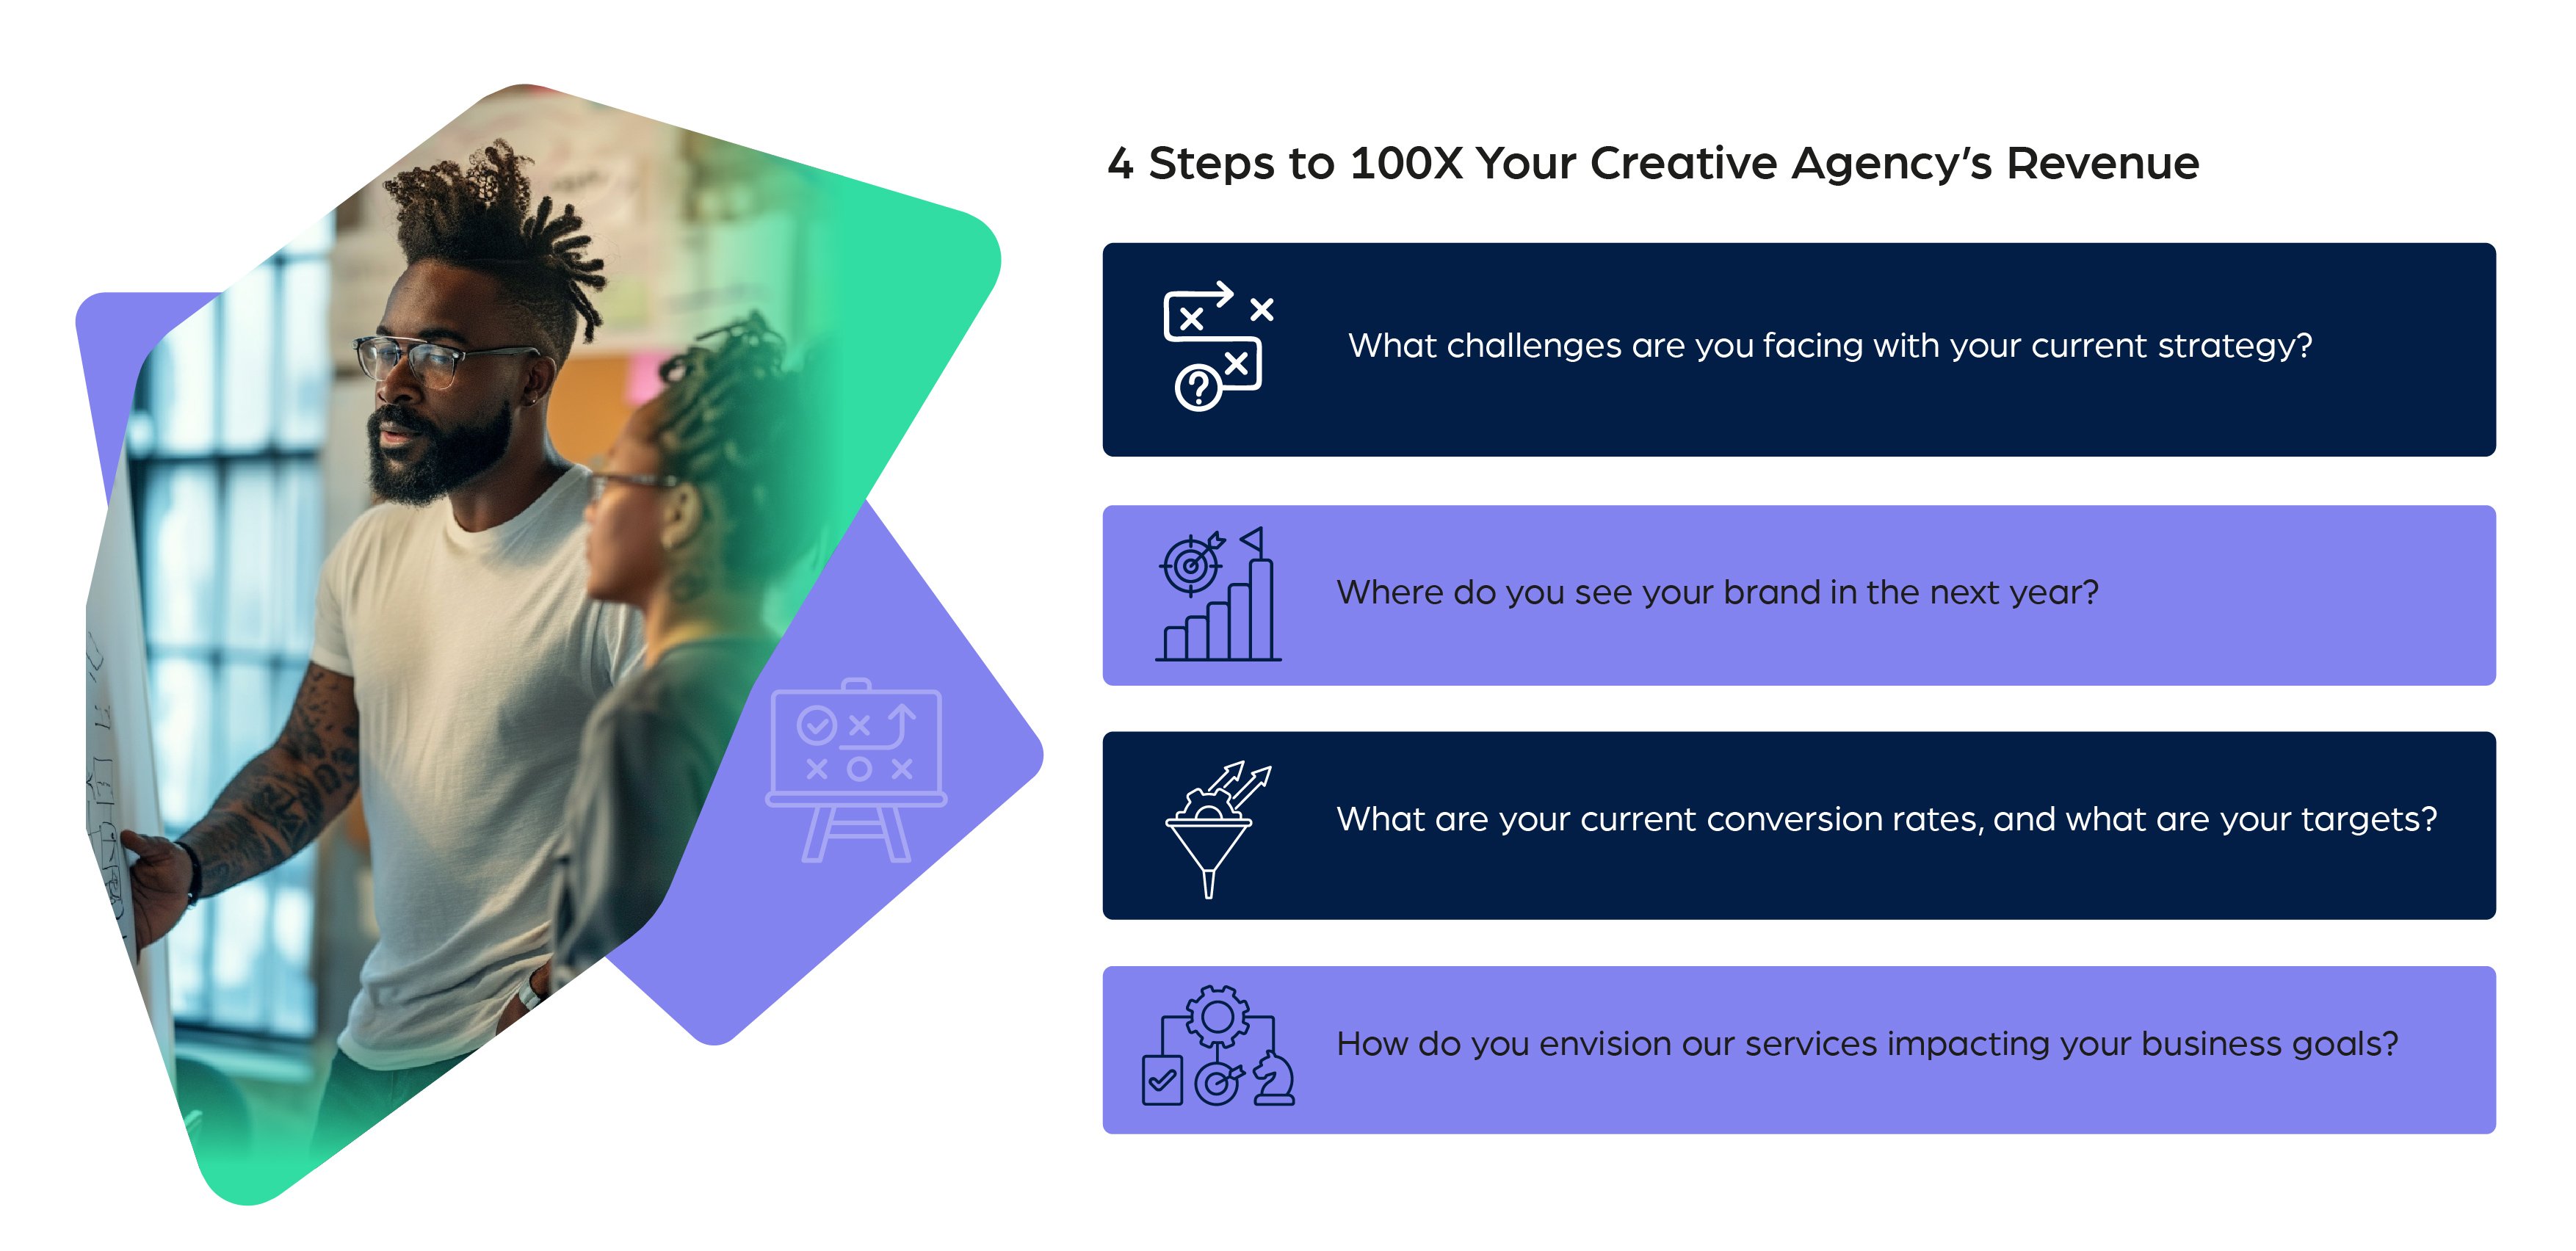 3 Steps to 100X Your Creative Agency’s Revenue